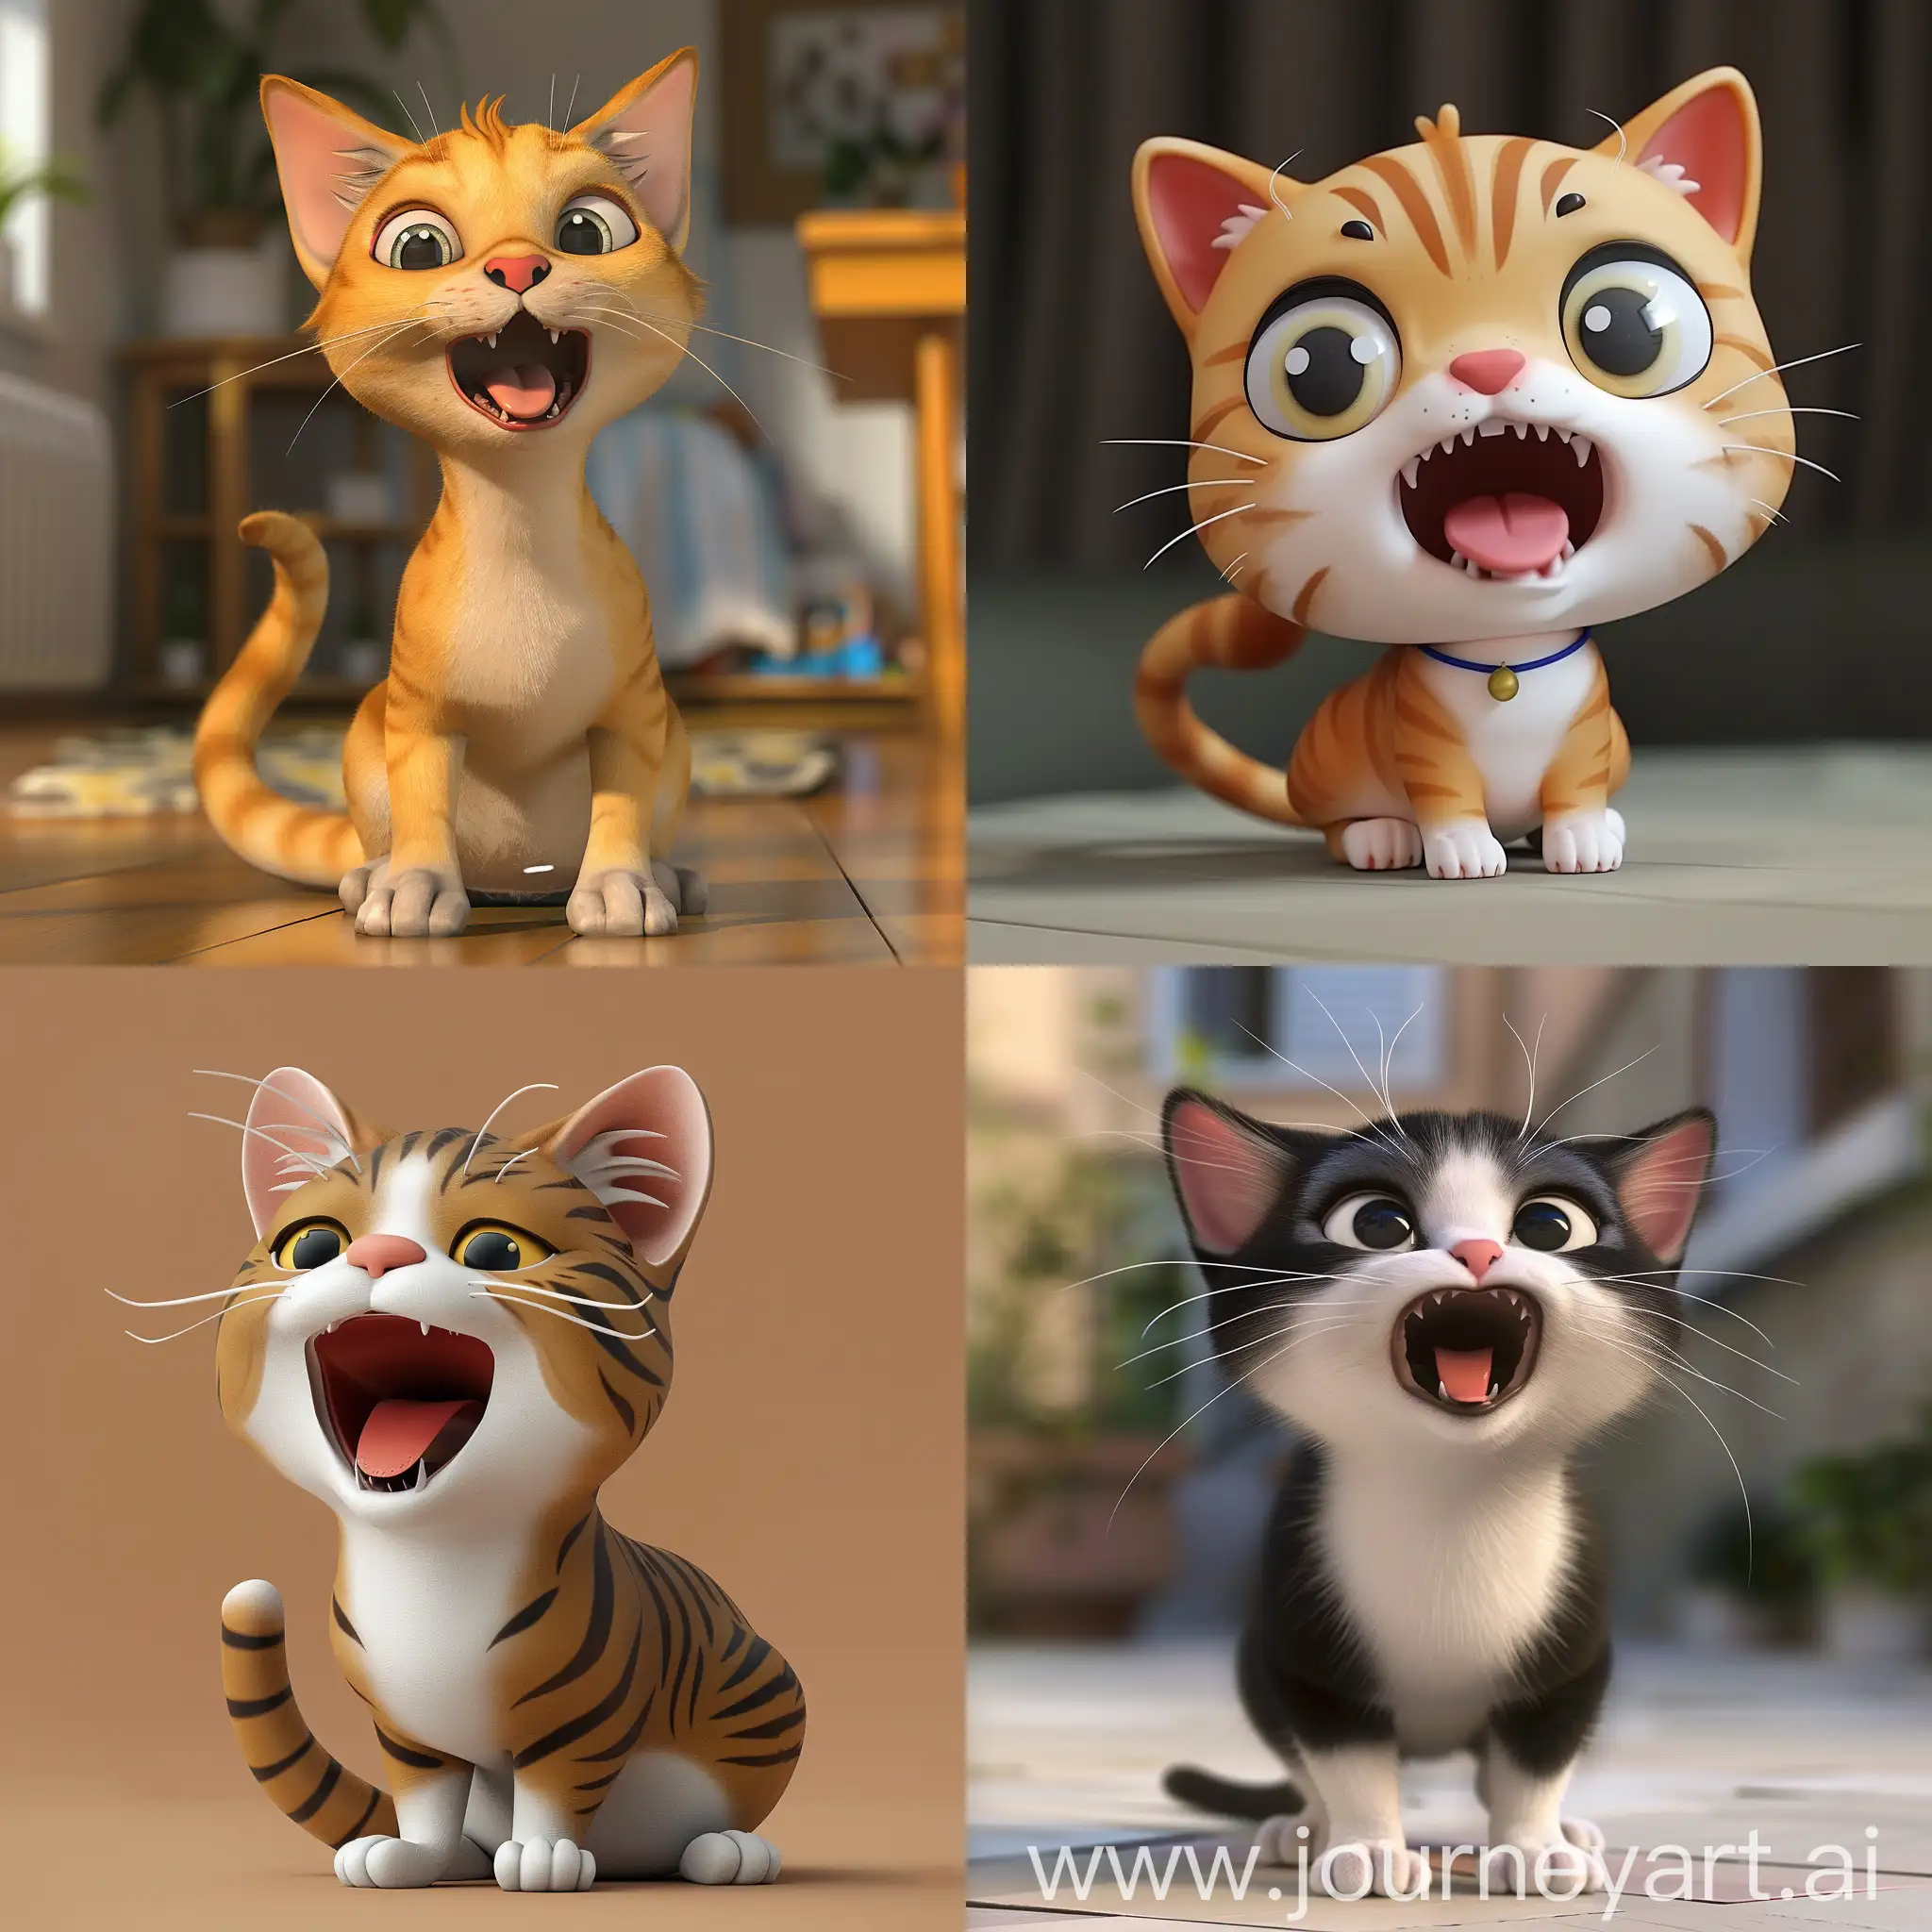 Adorable-3D-Cartoon-Cat-with-Open-Mouth-in-Indoor-Setting